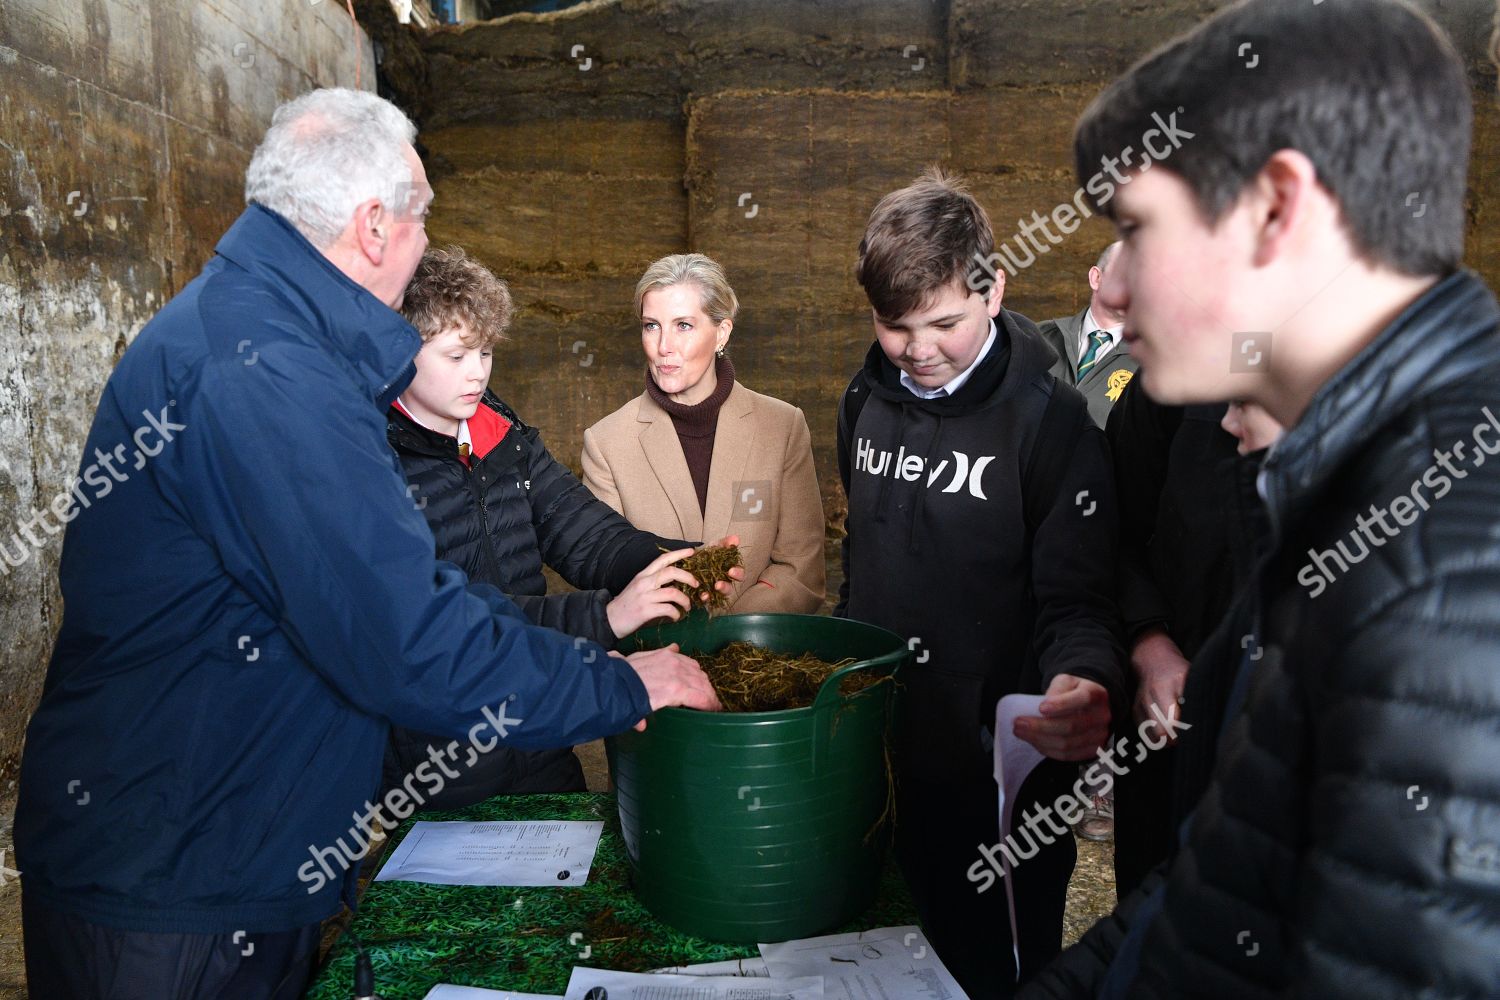 sophie-countess-of-wessex-visit-to-cumbria-shutterstock-editorial-10095439cf.jpg